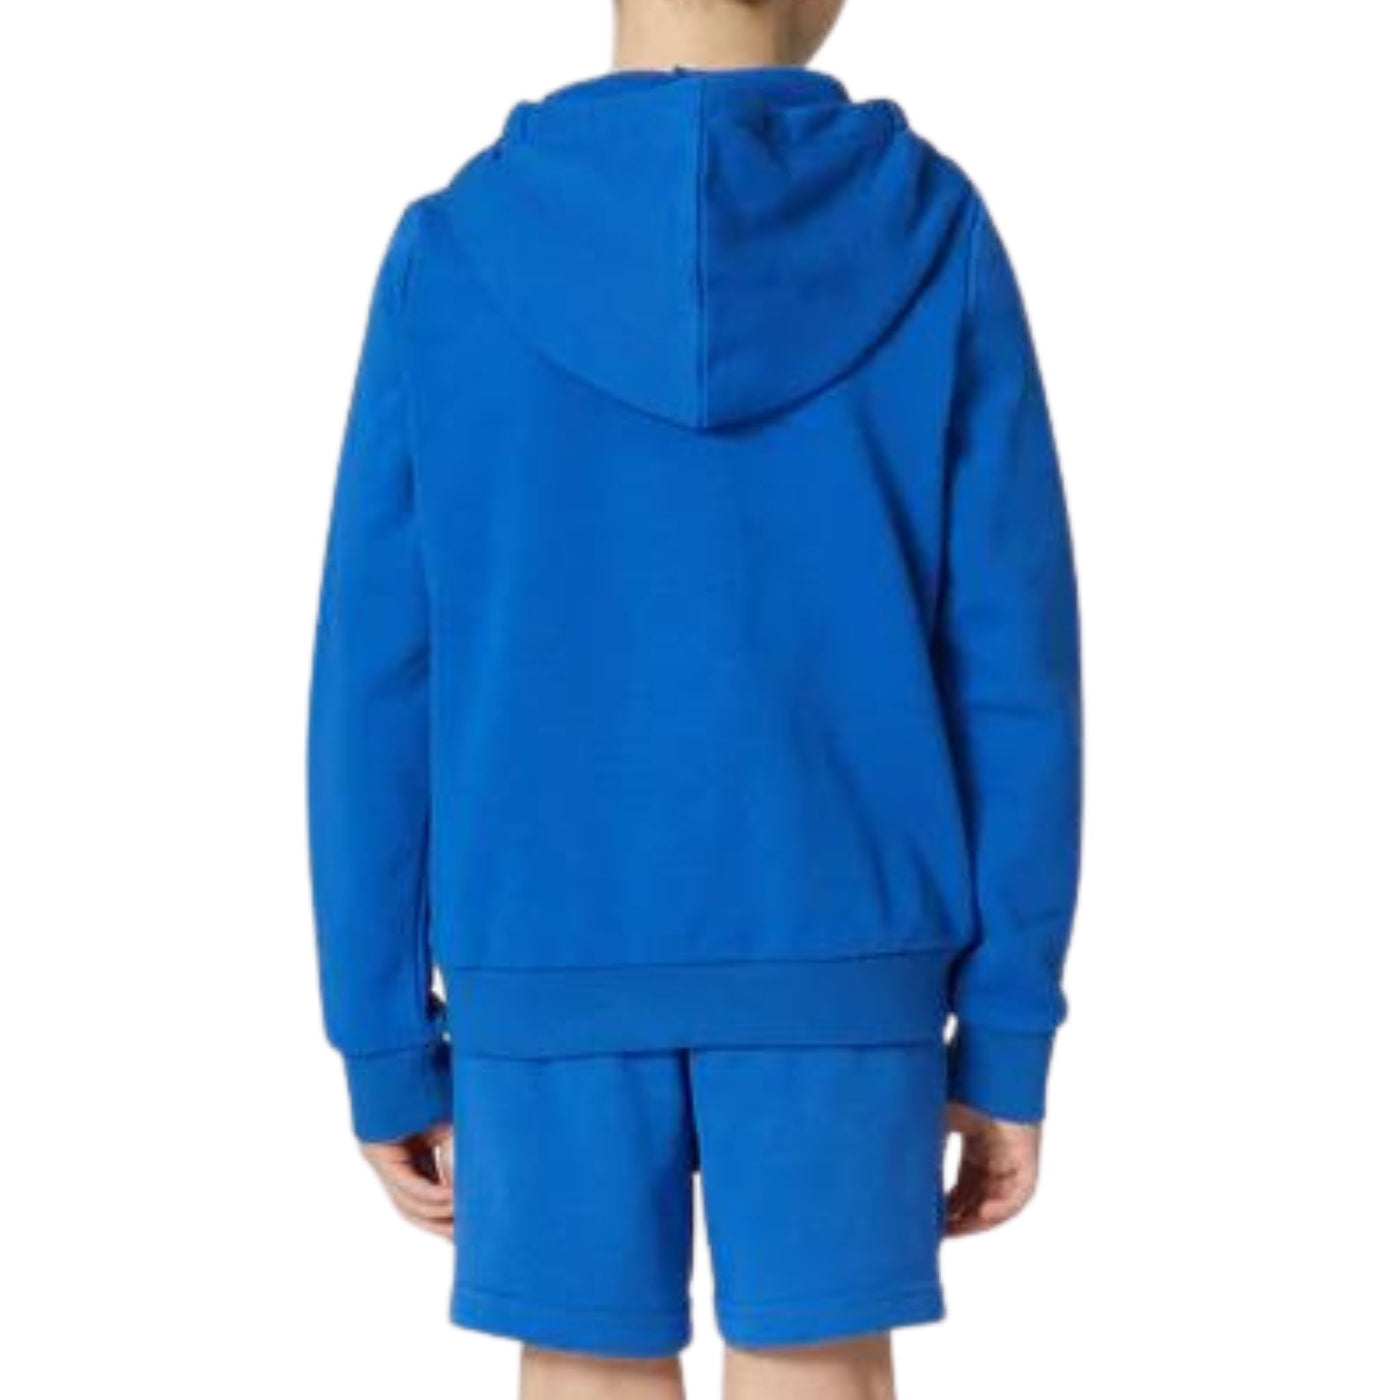 Child sweatshirt with buttoned pockets